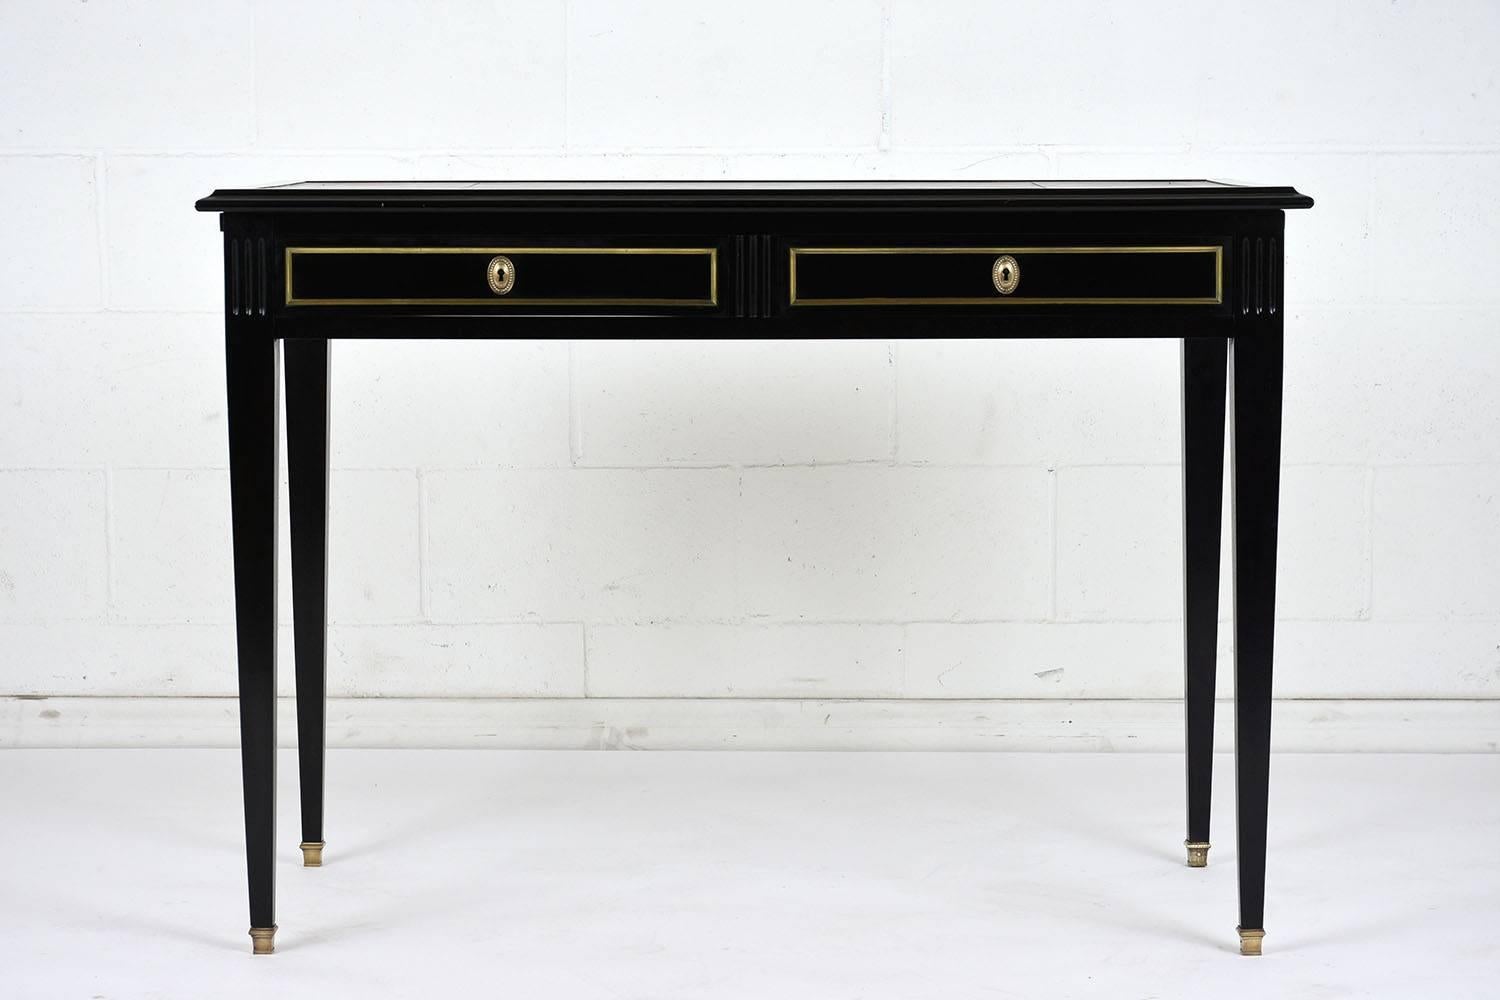 This 1900's French Louis XVI-style mahogany desk has been stained a rich black color with lacquered finish. There are two drawer with brass moulding and keyhole plates. The top of the desk has a brown embossed leather work area with gilt trims.